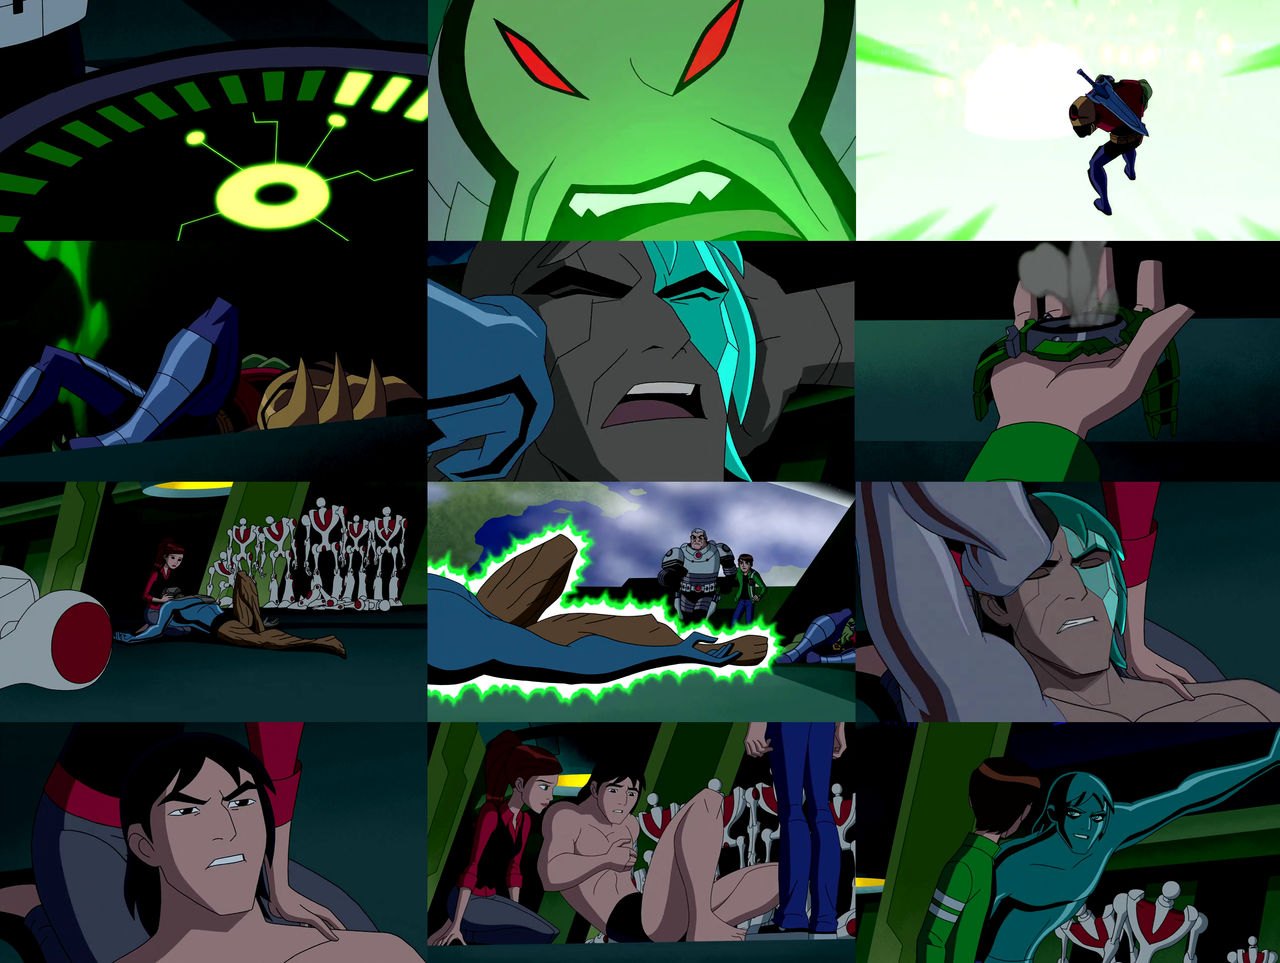 Ben 10 Reboot - The Aliens of Kevin 11 by dlee1293847 on DeviantArt